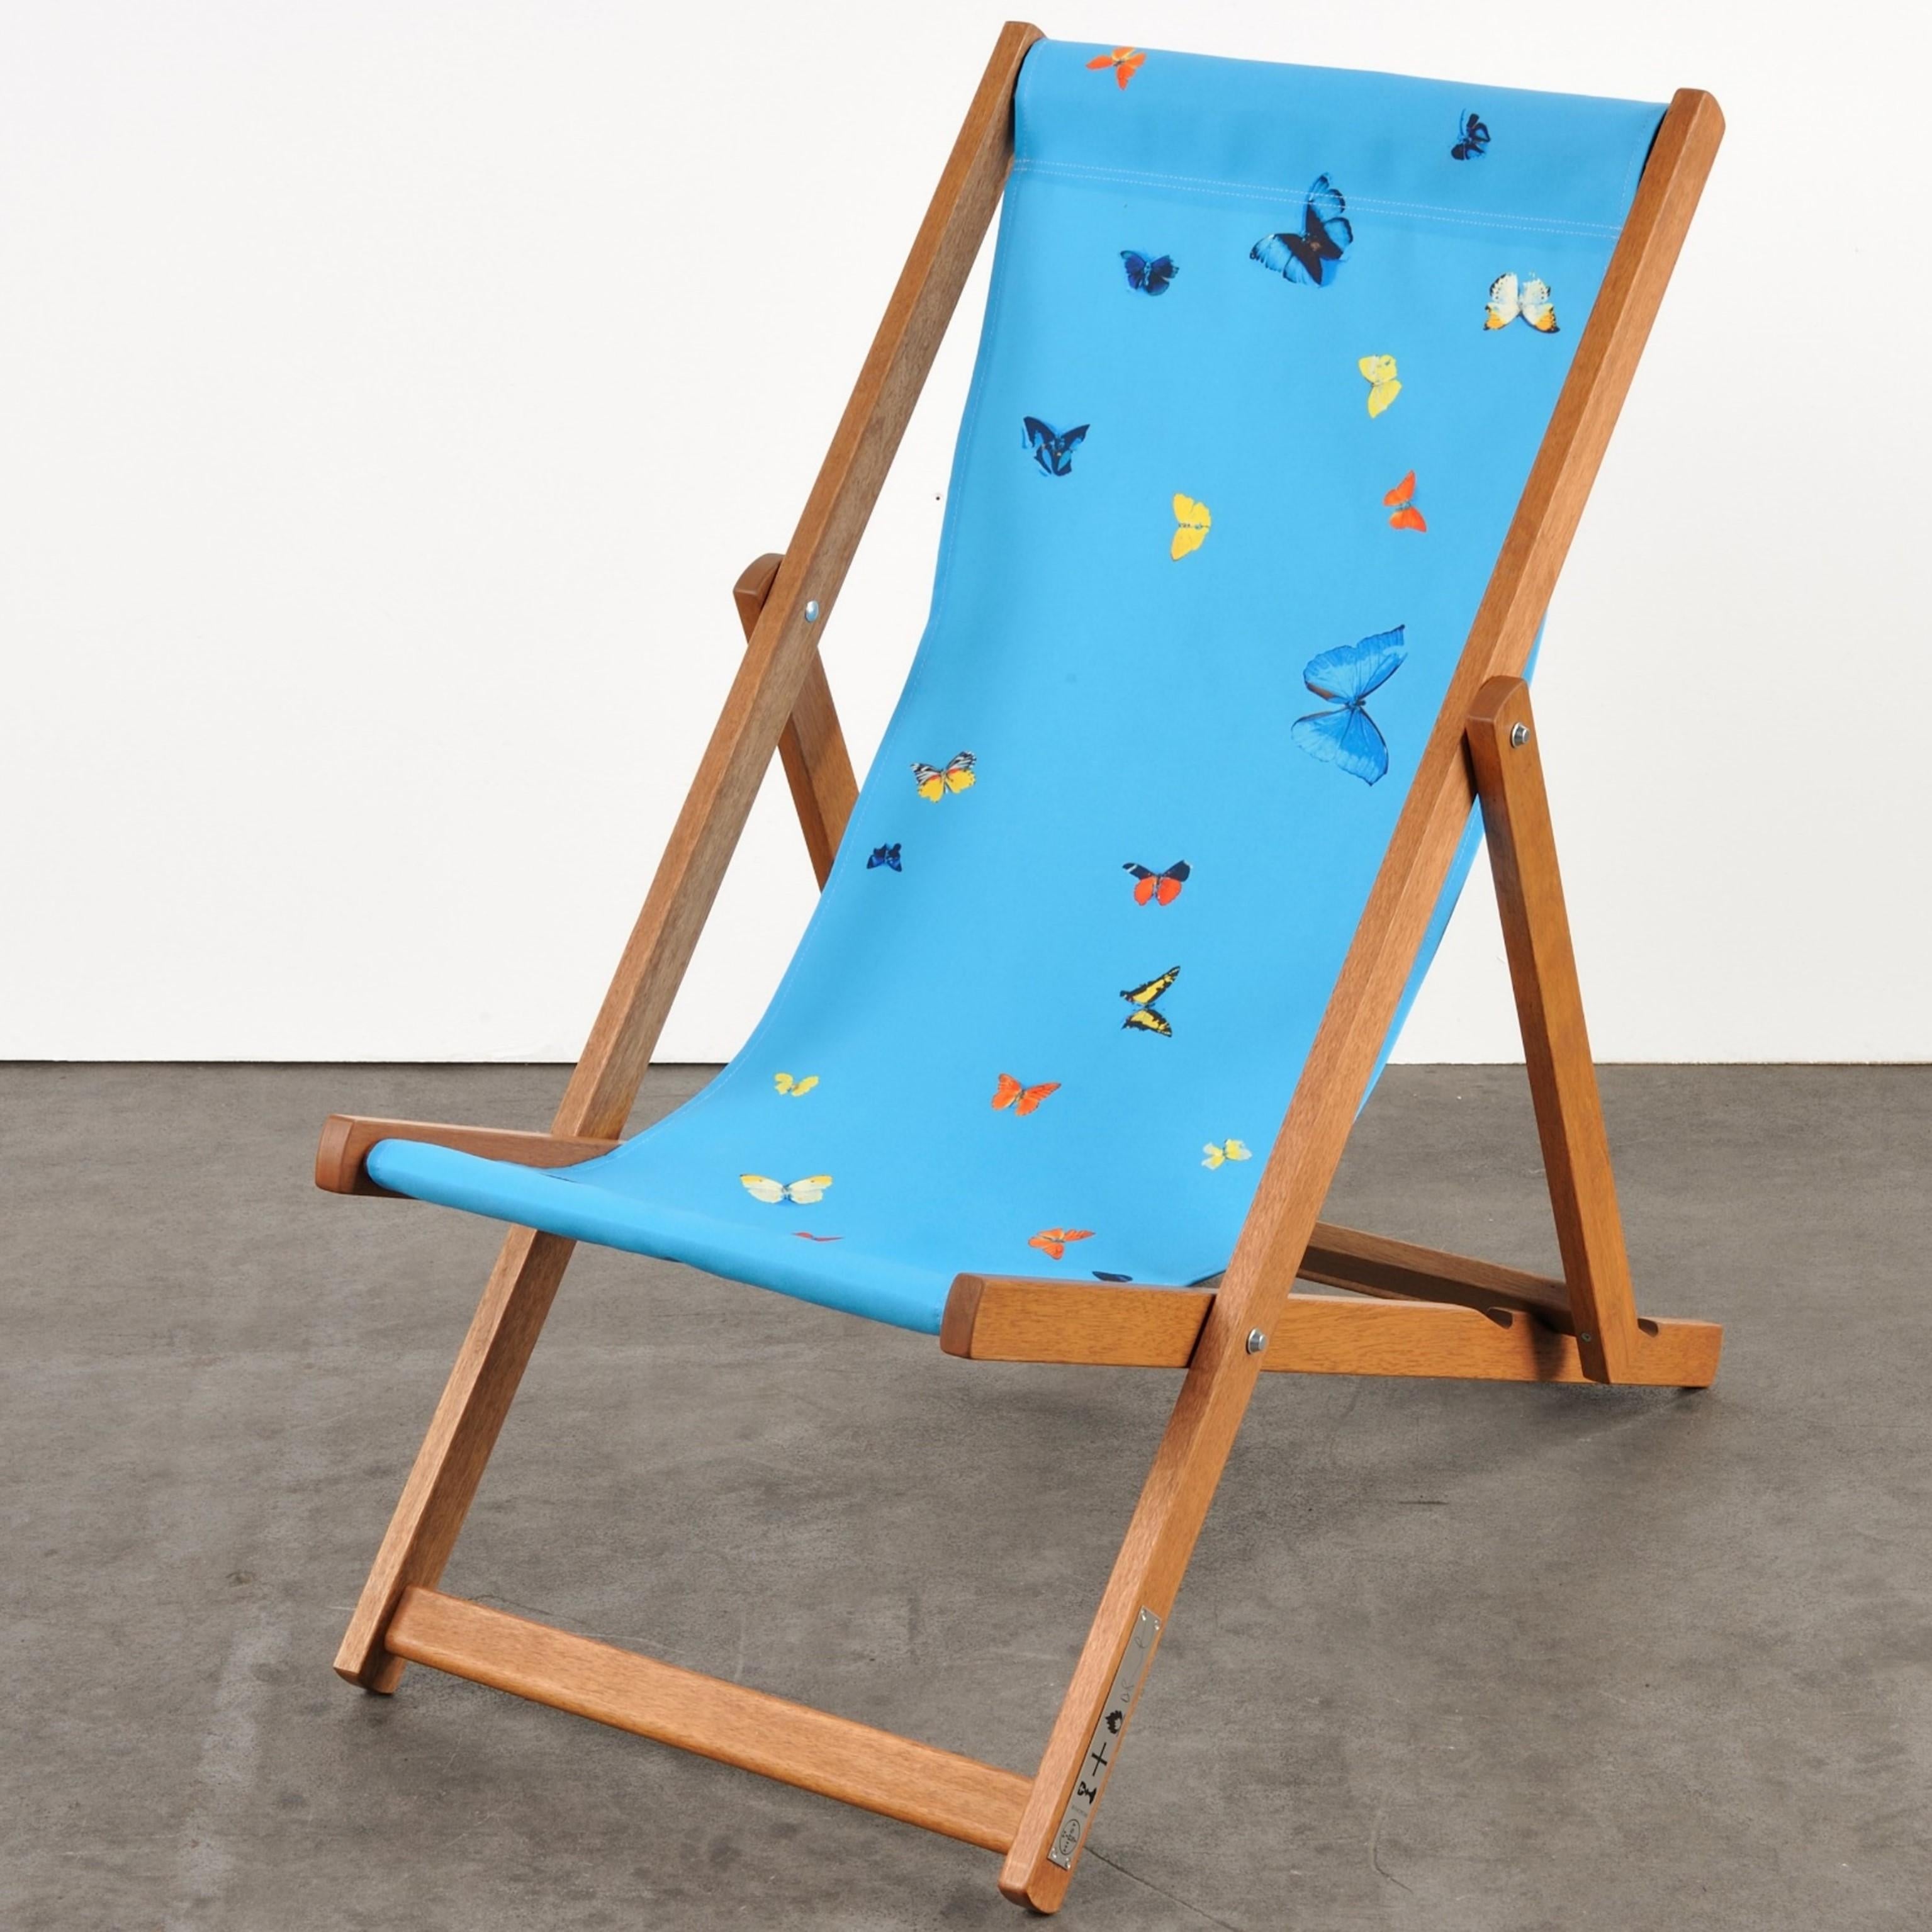 Hirst's Deckchairs use one of the artist's familiar motifs: a monochromatic background interrupted by a scattering of butterflies freezed in an eternal position. 

Damien Hirst
Deckchair (Sky Blue) - Contemporary art, 21st Century, Blue, Design,